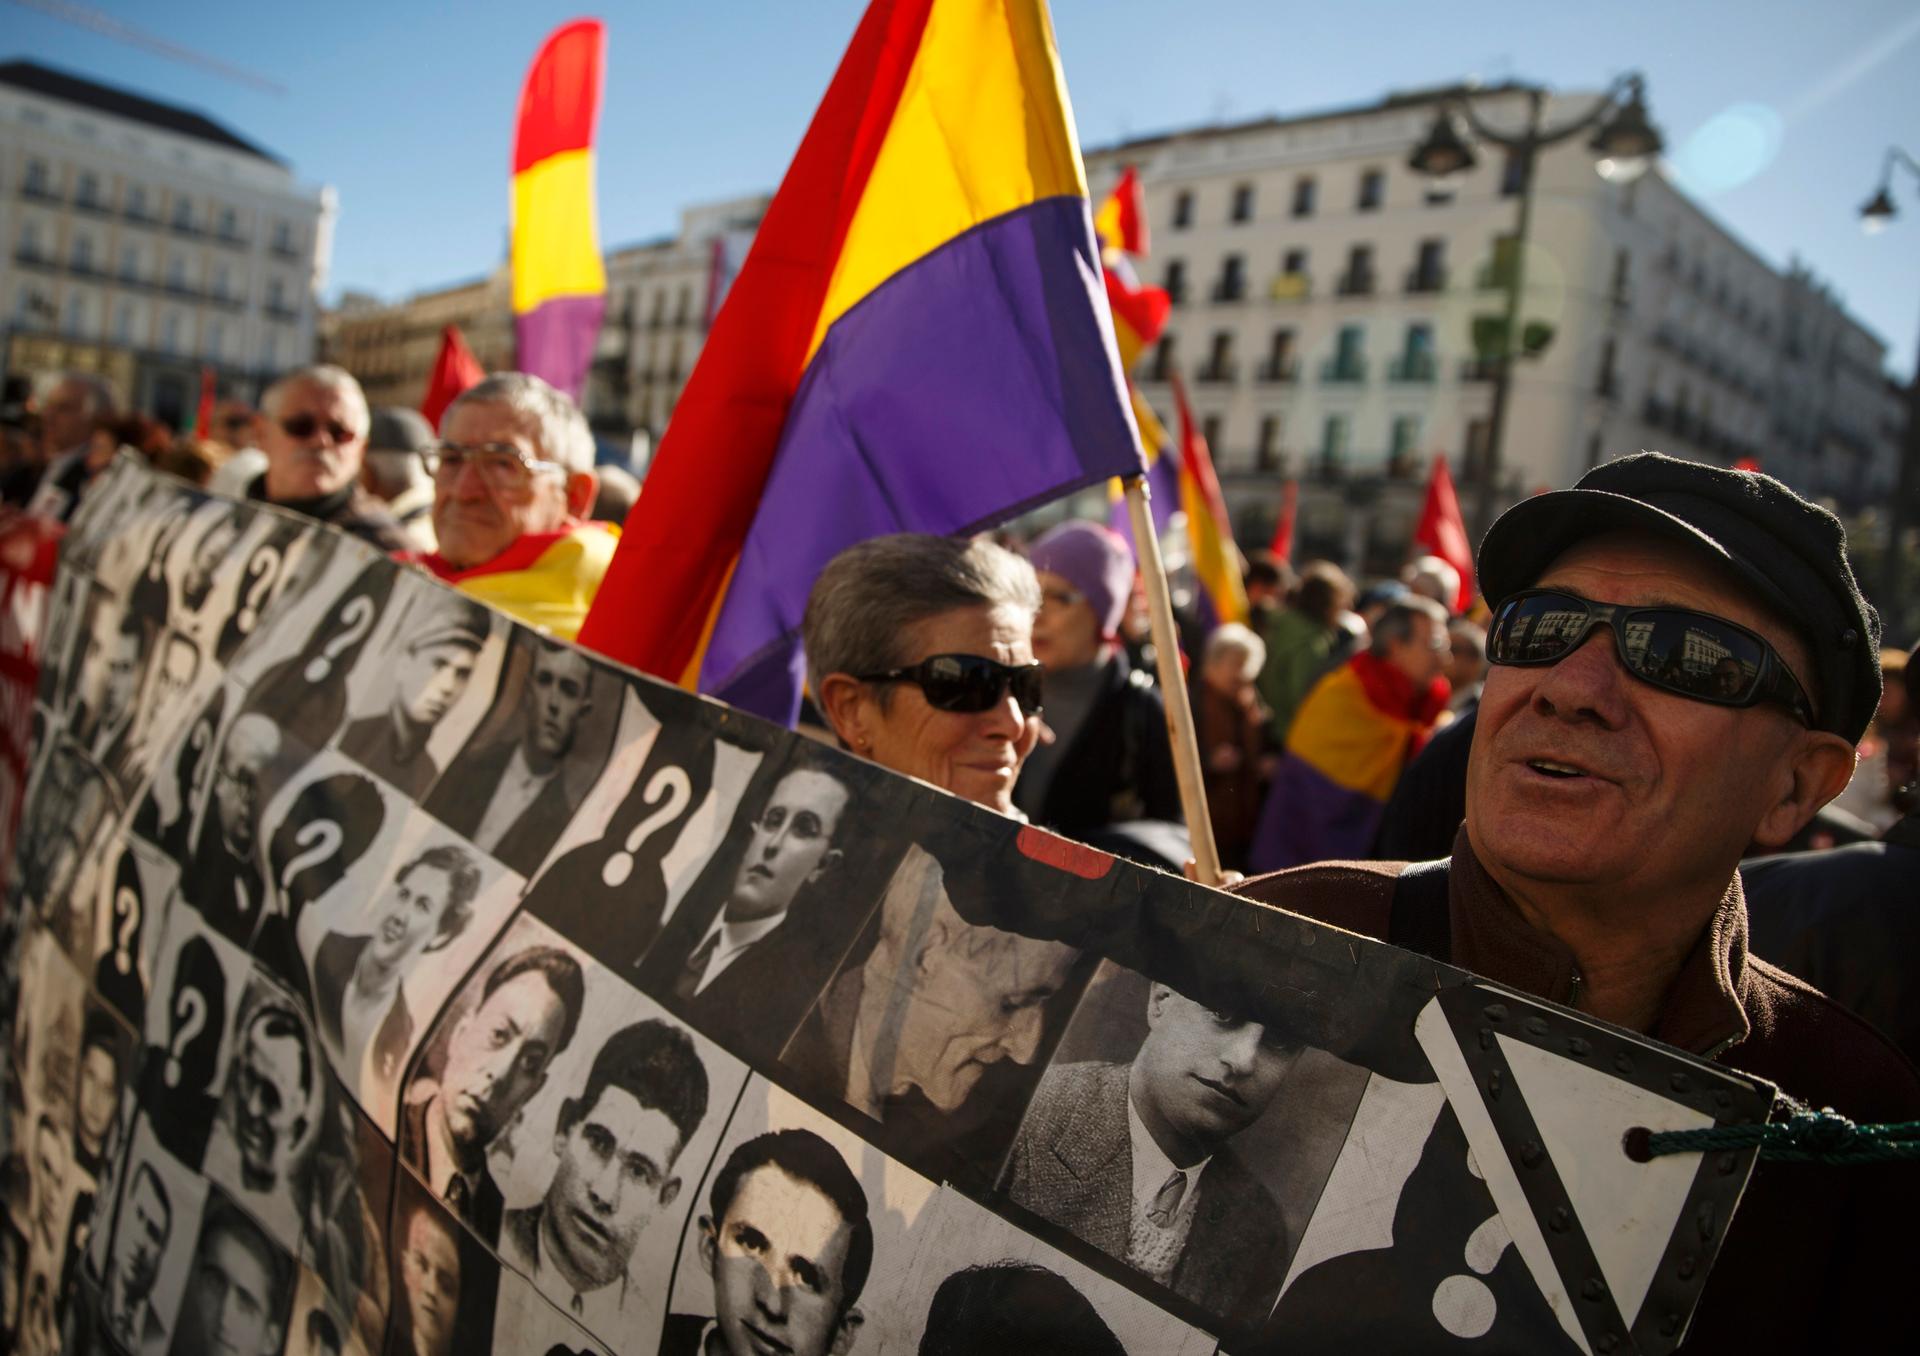 A 2014 gathering commemorating victims of Franco's military regime